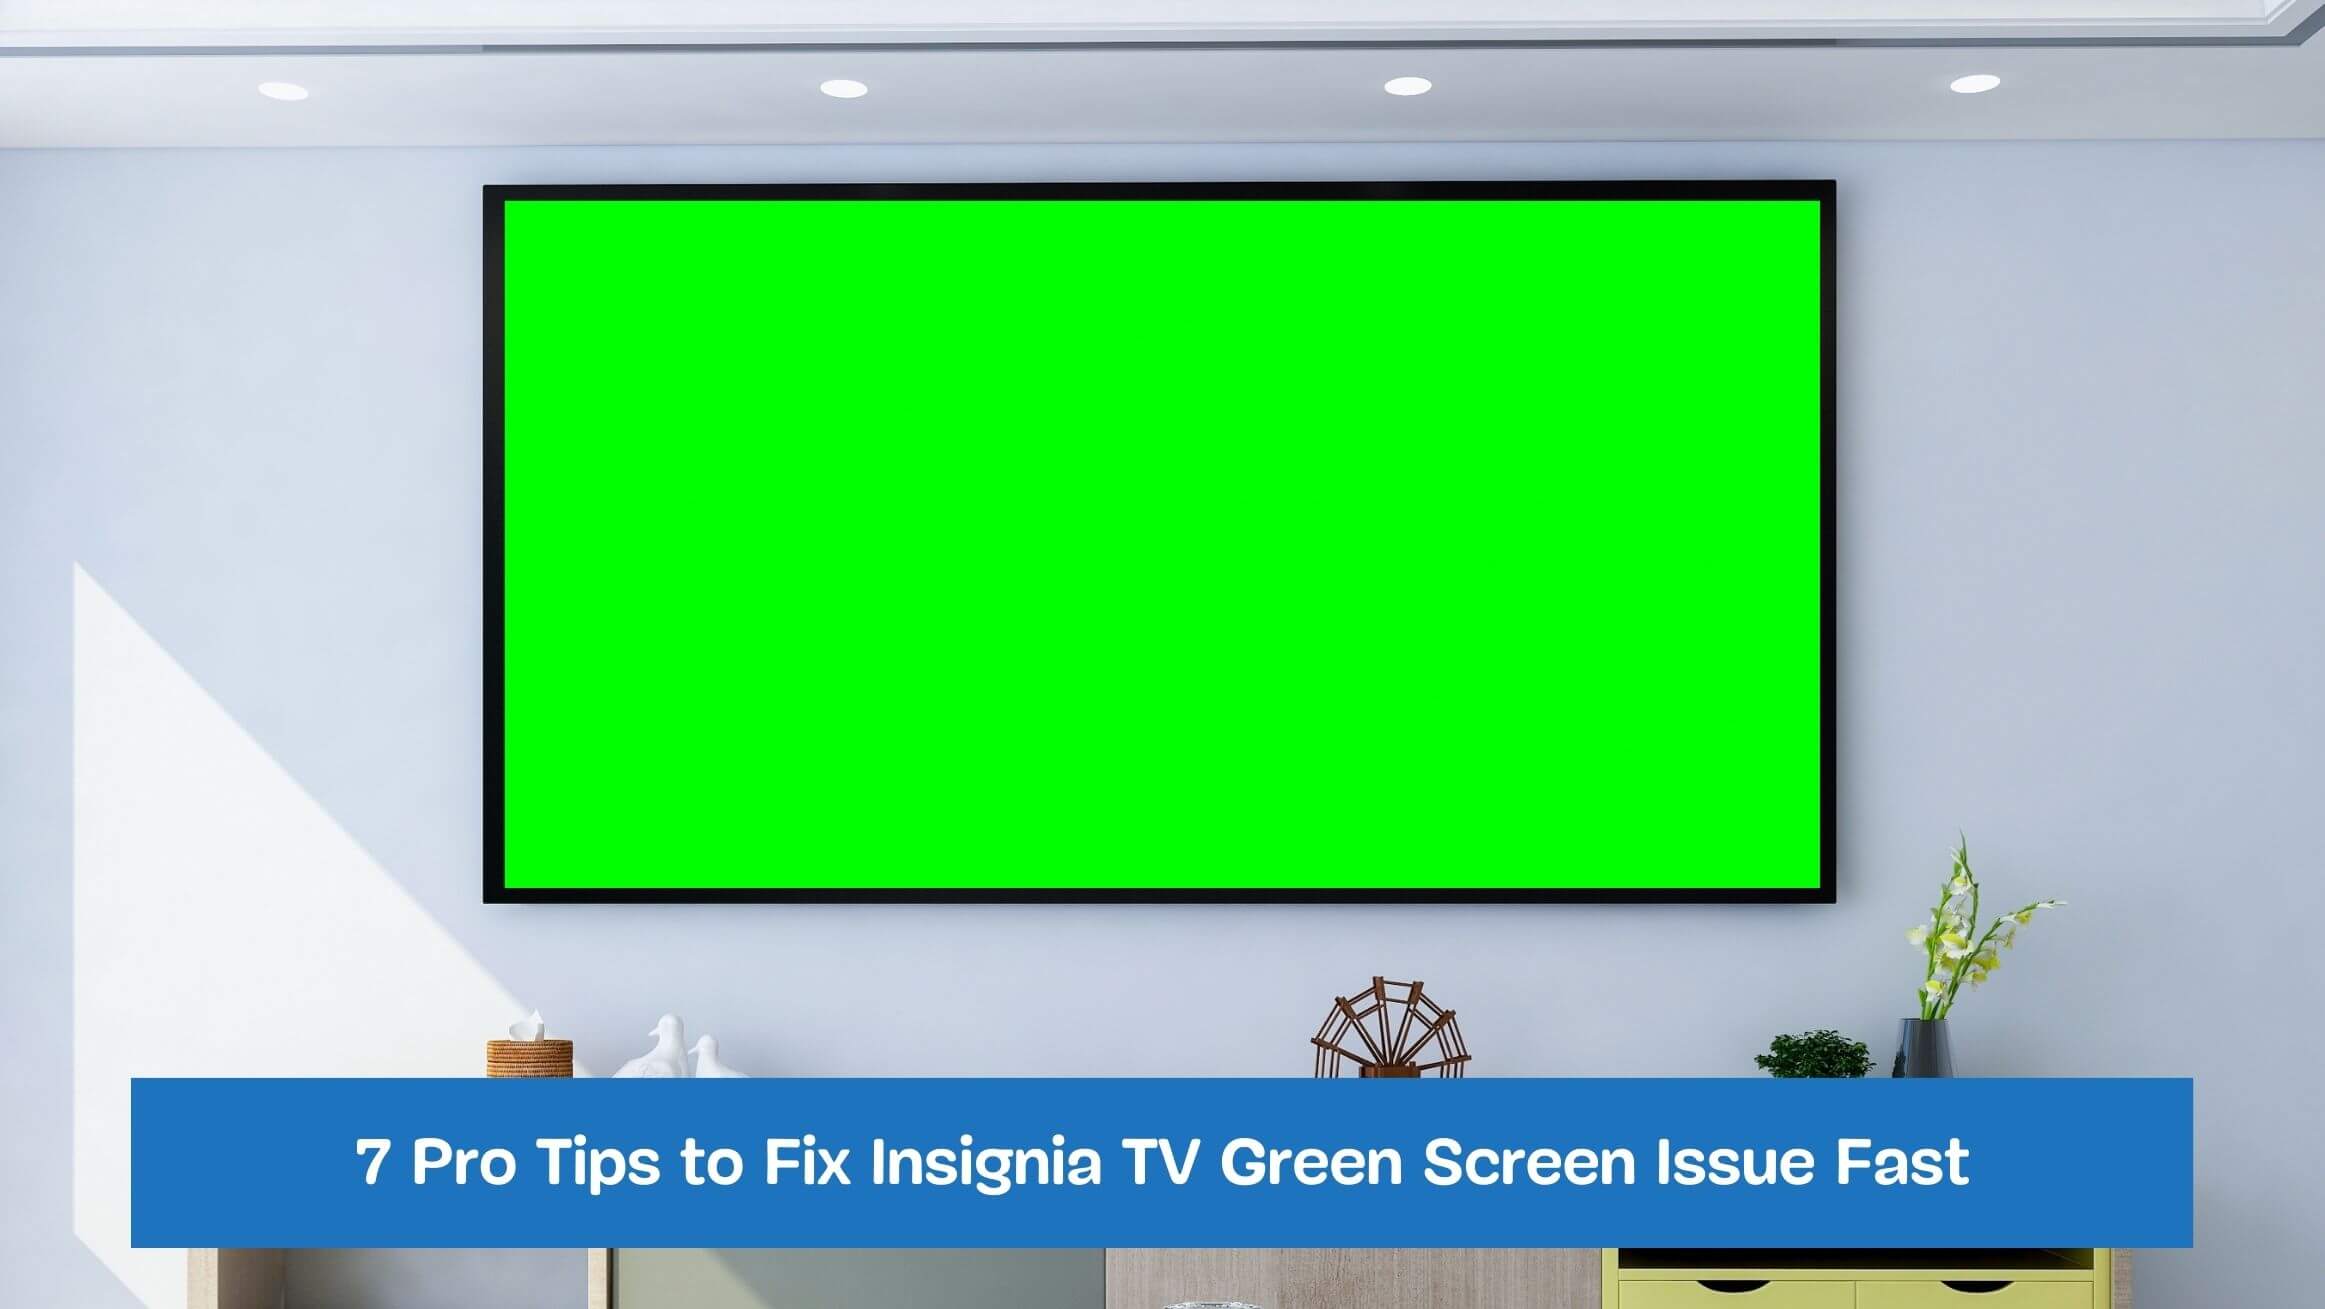 7 Pro Tips to Fix Insignia TV Green Screen Issue Fast